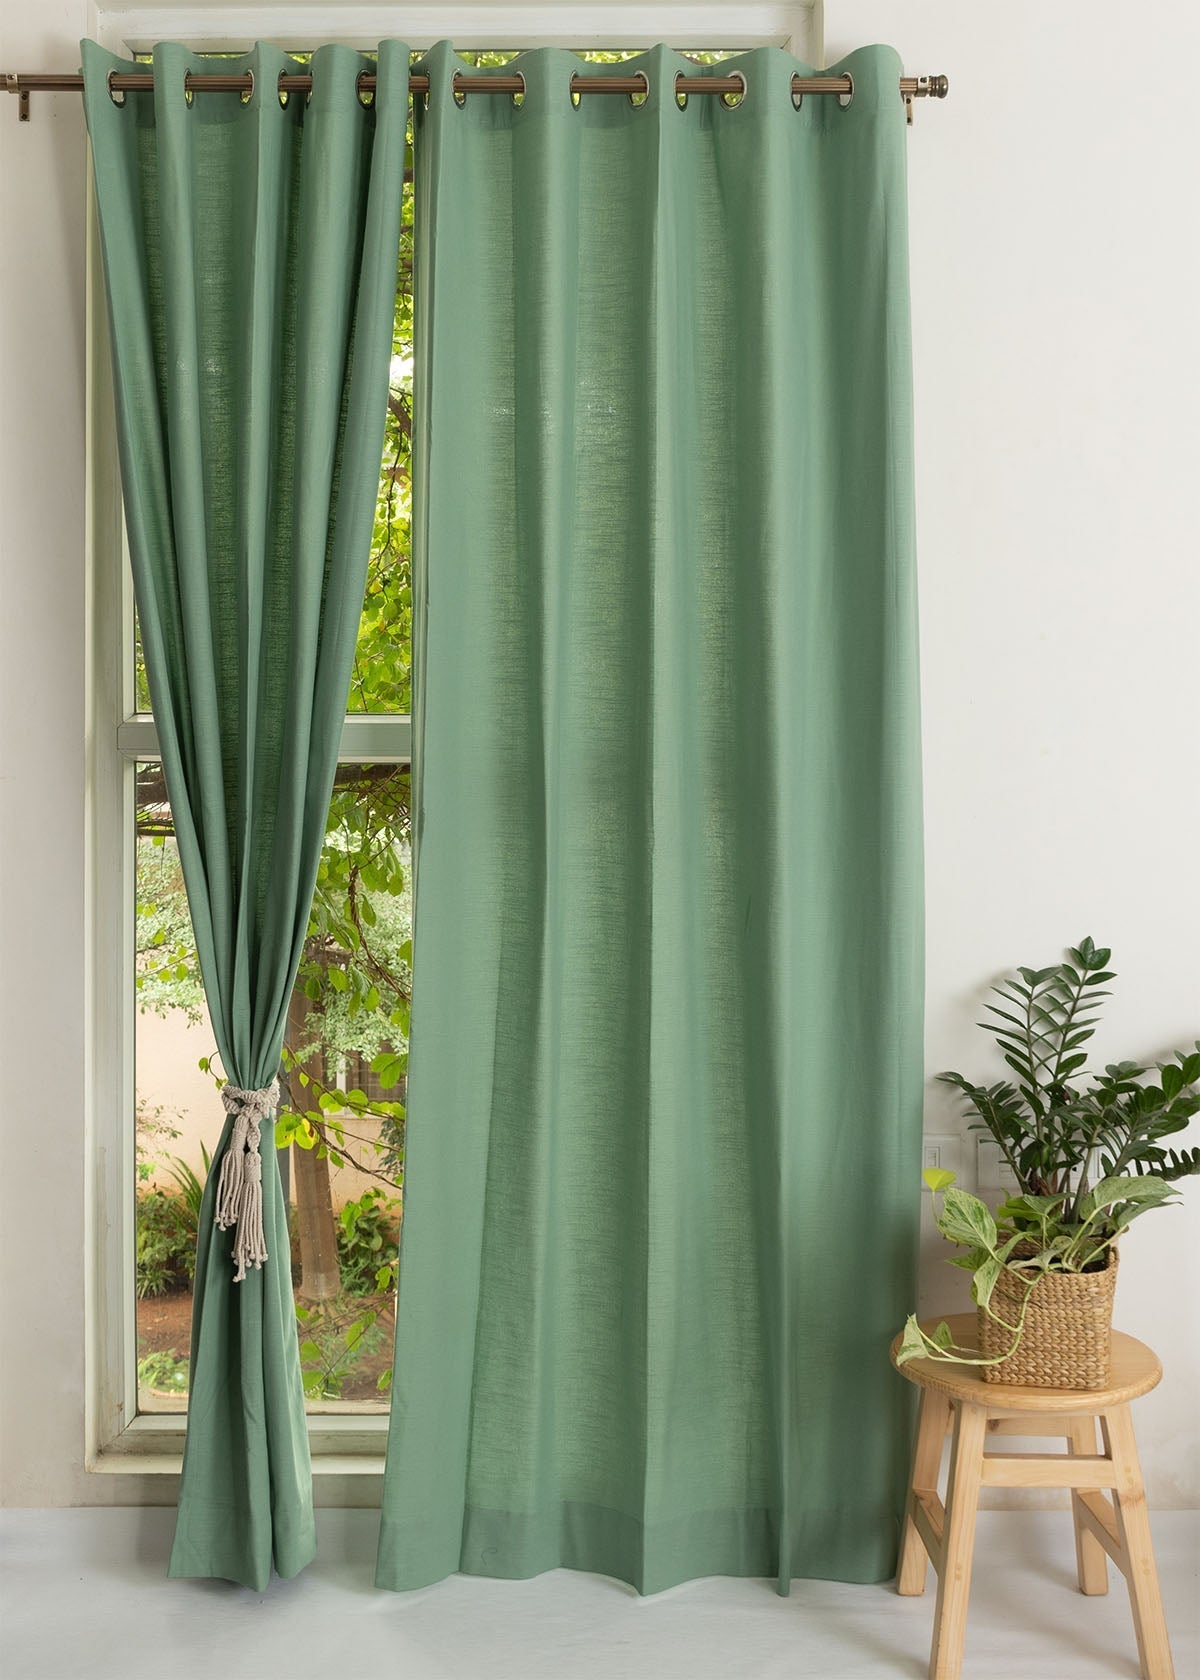 Solid Sage green 100% cotton plain curtain for bedroom - Room darkening - Pack of 1